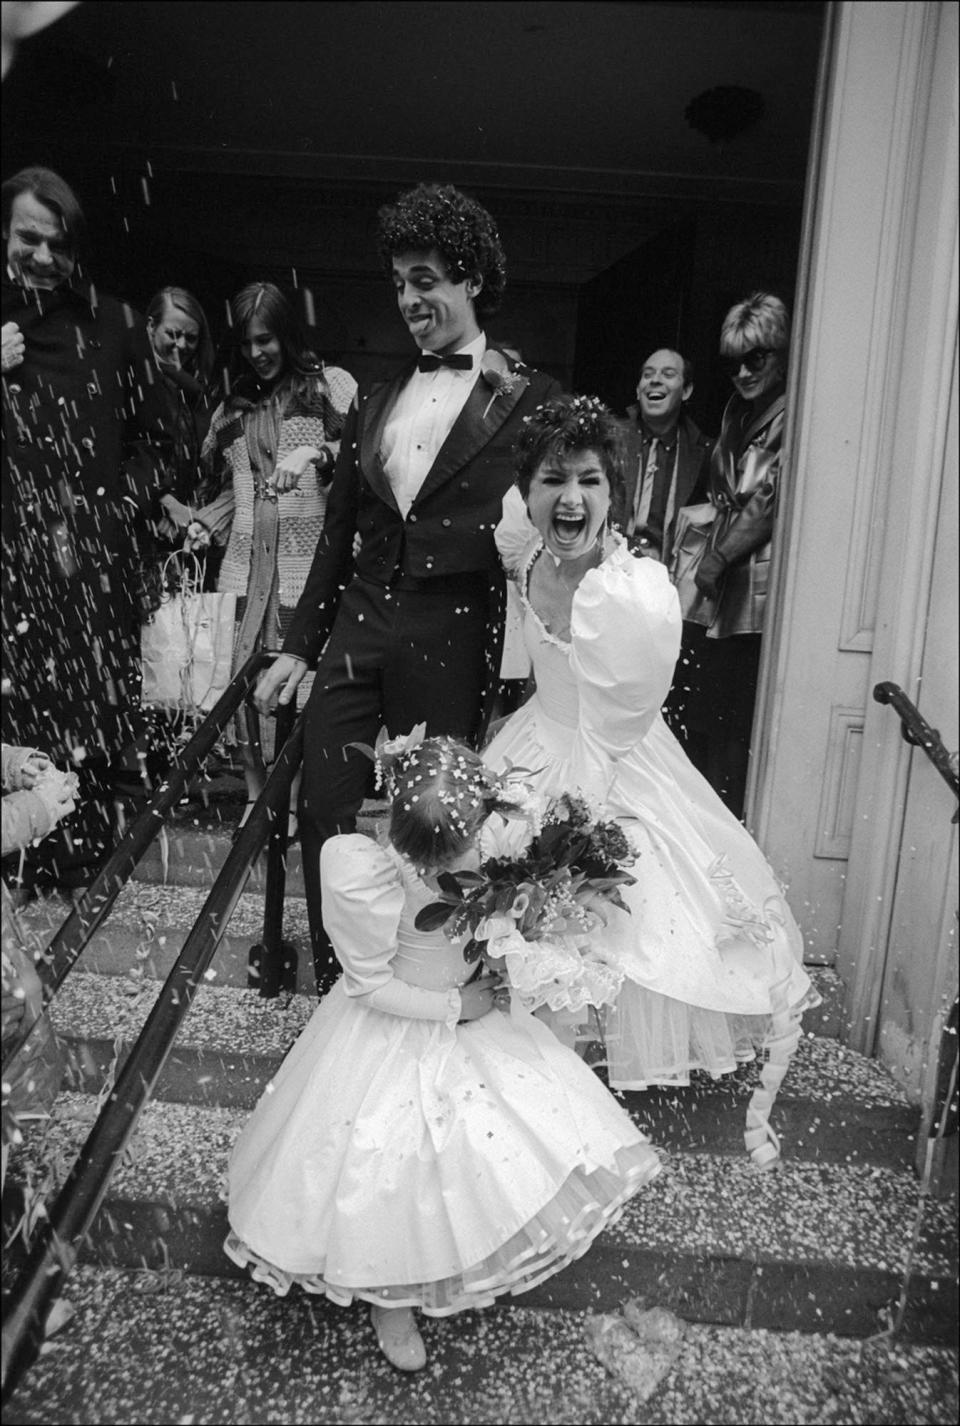 Jeffrey Oliviere and Betsy Johnson leave their wedding ceremony on February 7, 1981.